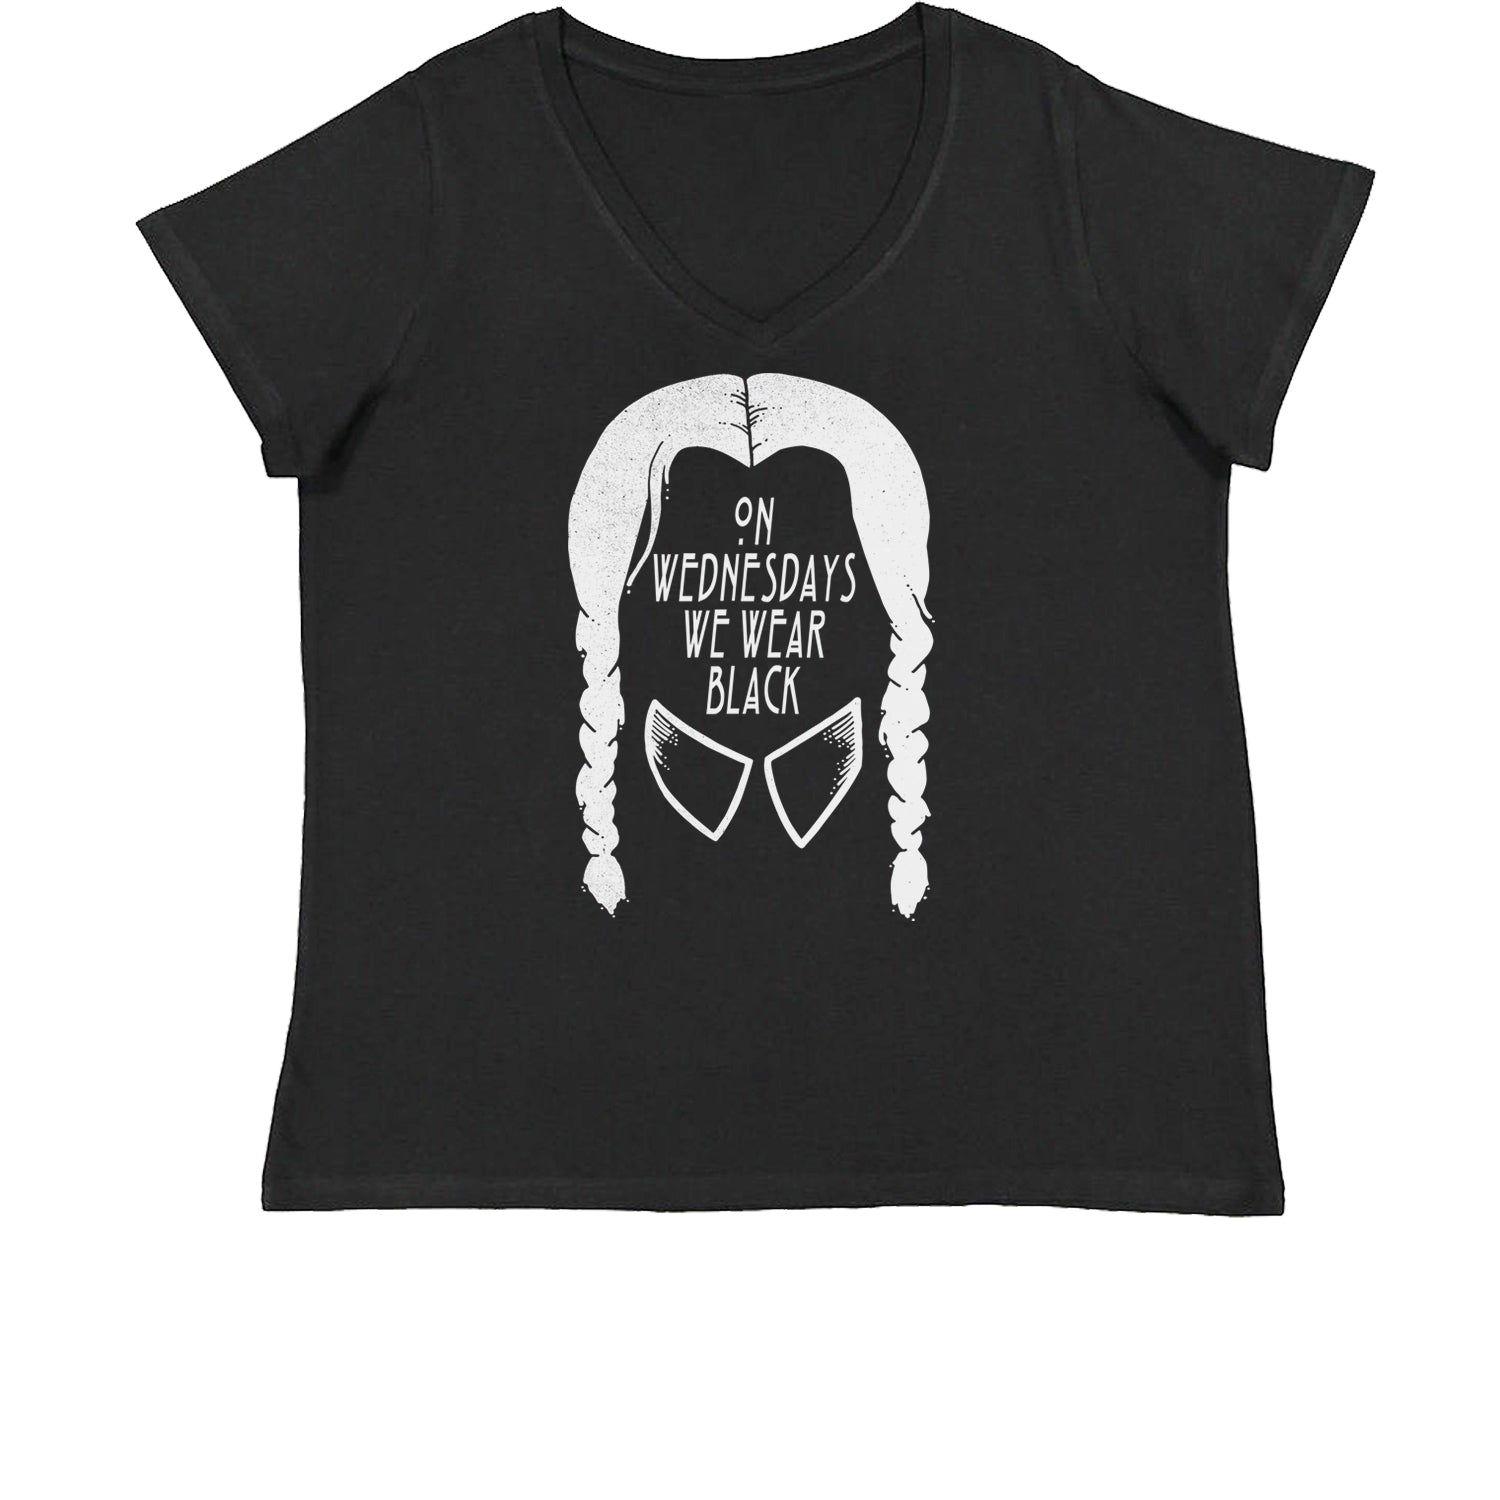 On Wednesdays, We Wear Black Womens Plus Size V-Neck T-shirt addams, family, gomez, morticia, pugsly, ricci, Wednesday by Expression Tees